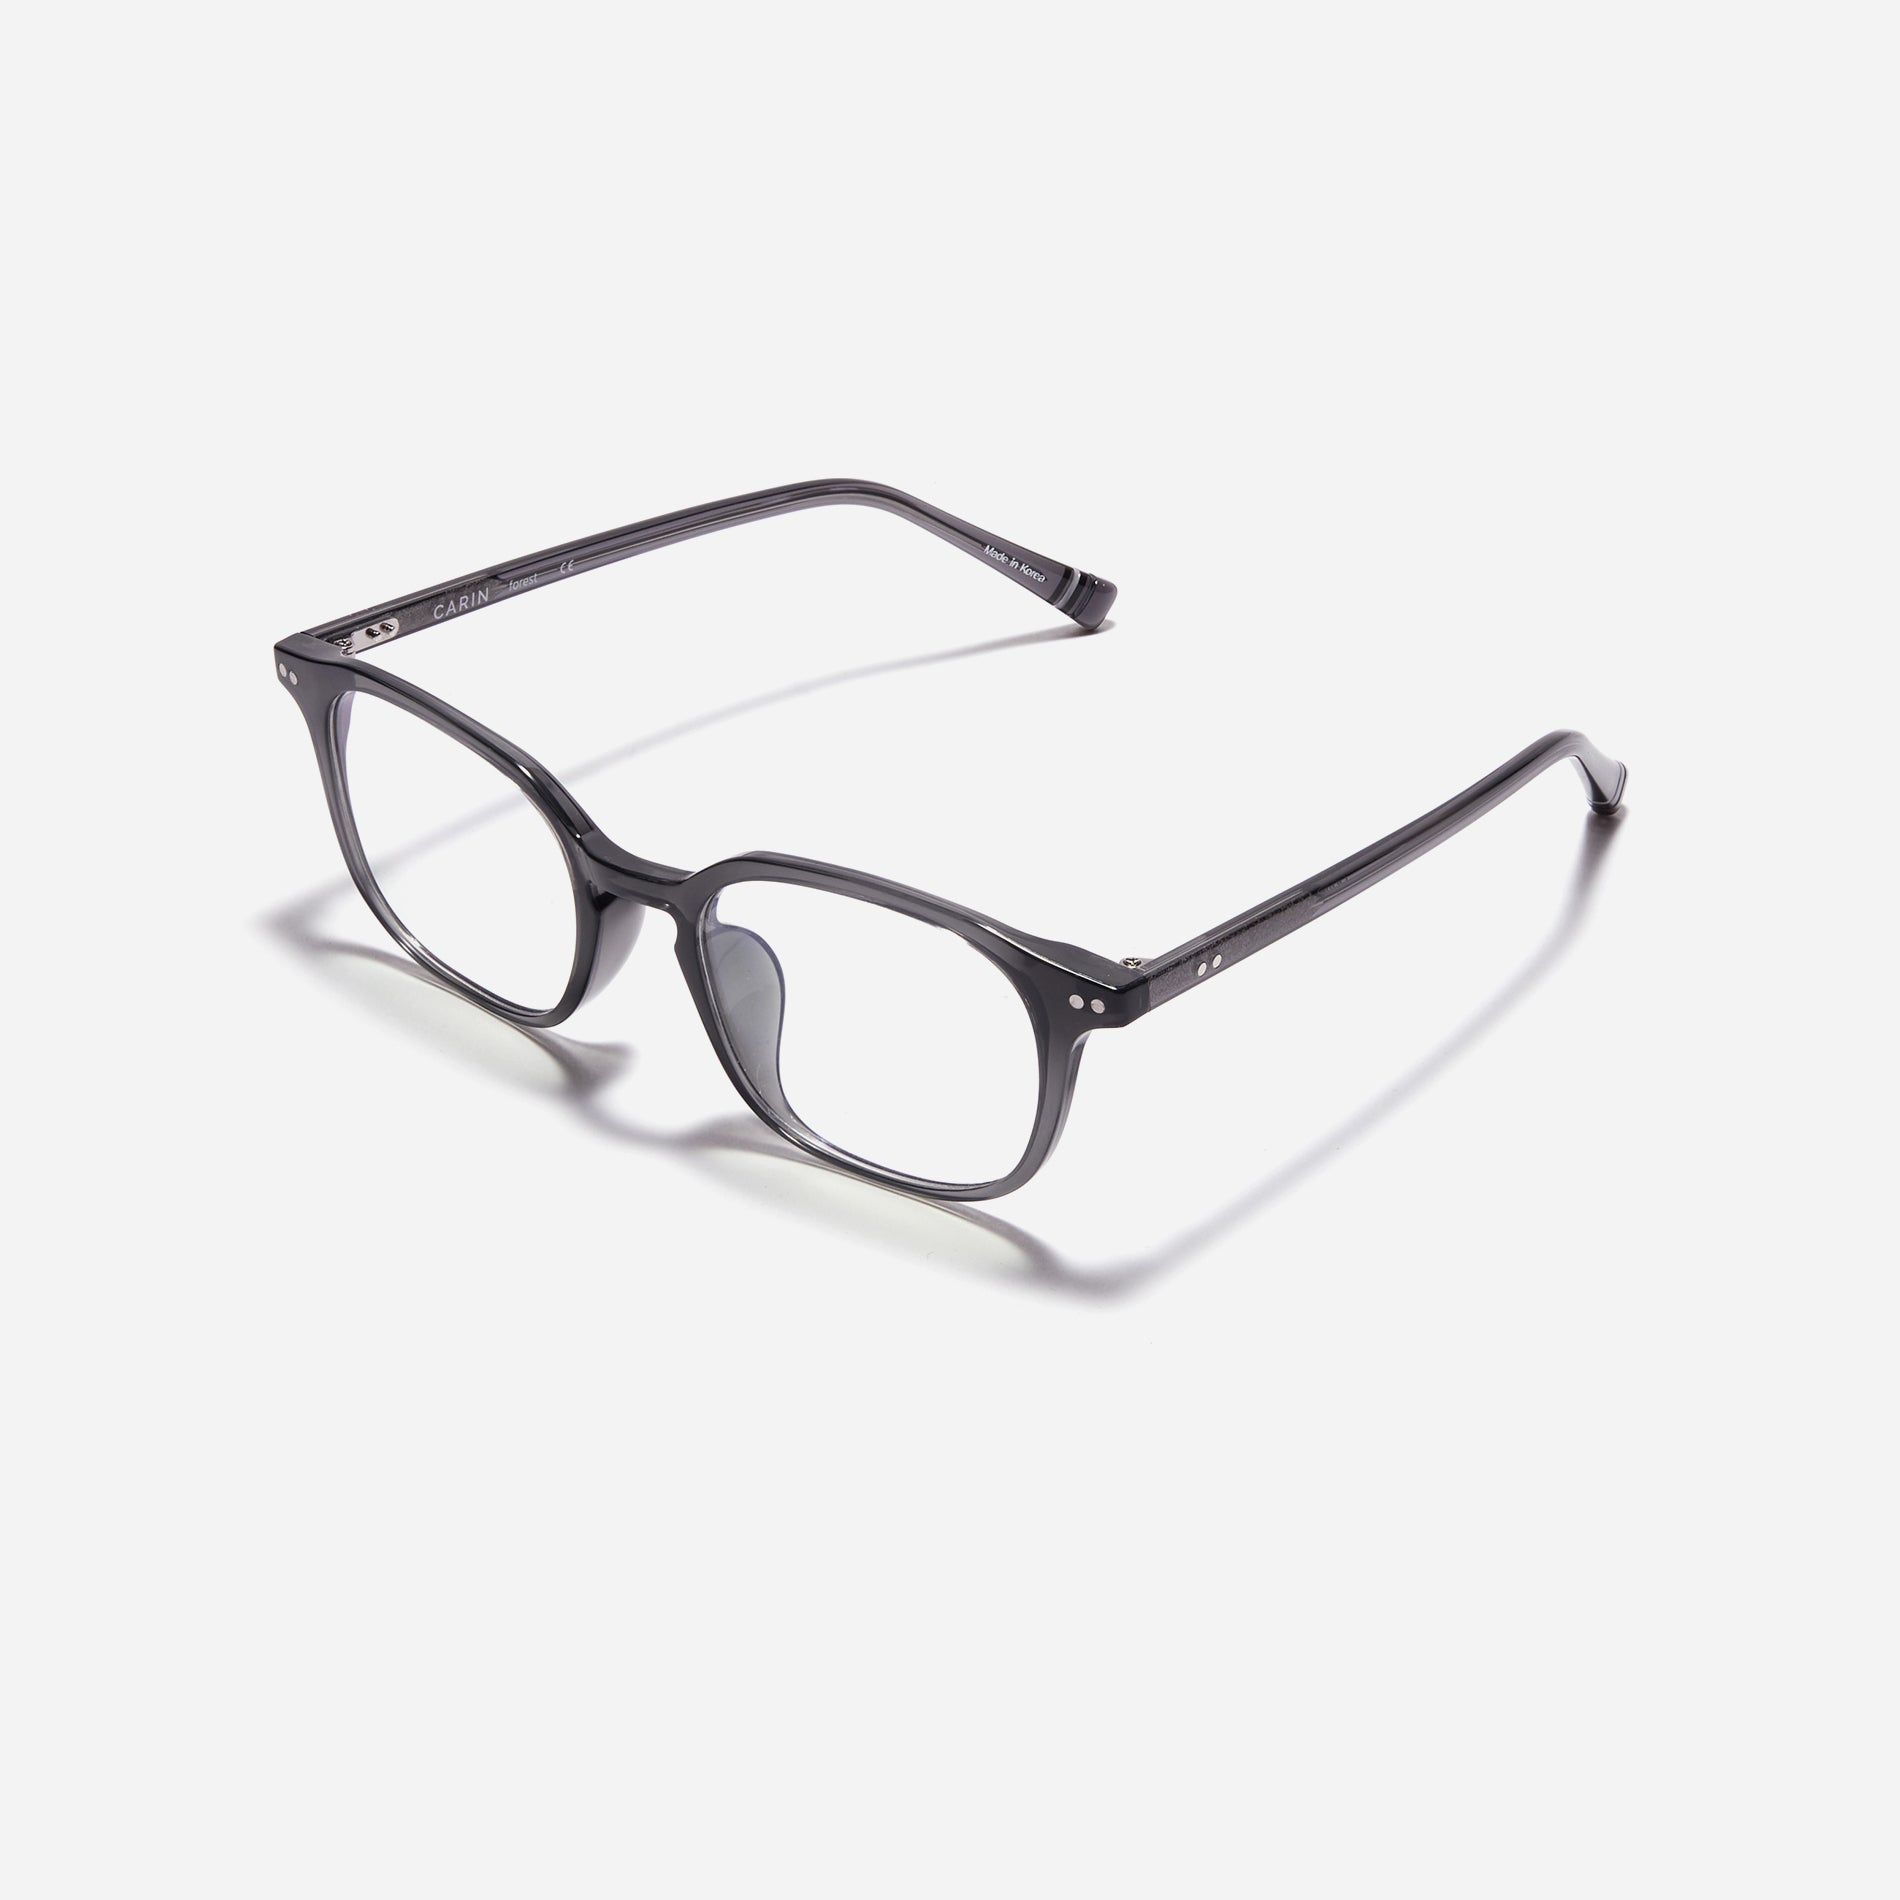 Round-shaped horn-rimmed eyeglasses featuring a sturdy and lightweight frame, Duve design incorporates dual lining on the tips to prevent slipping and ensure a consistently comfortable wearing experience.